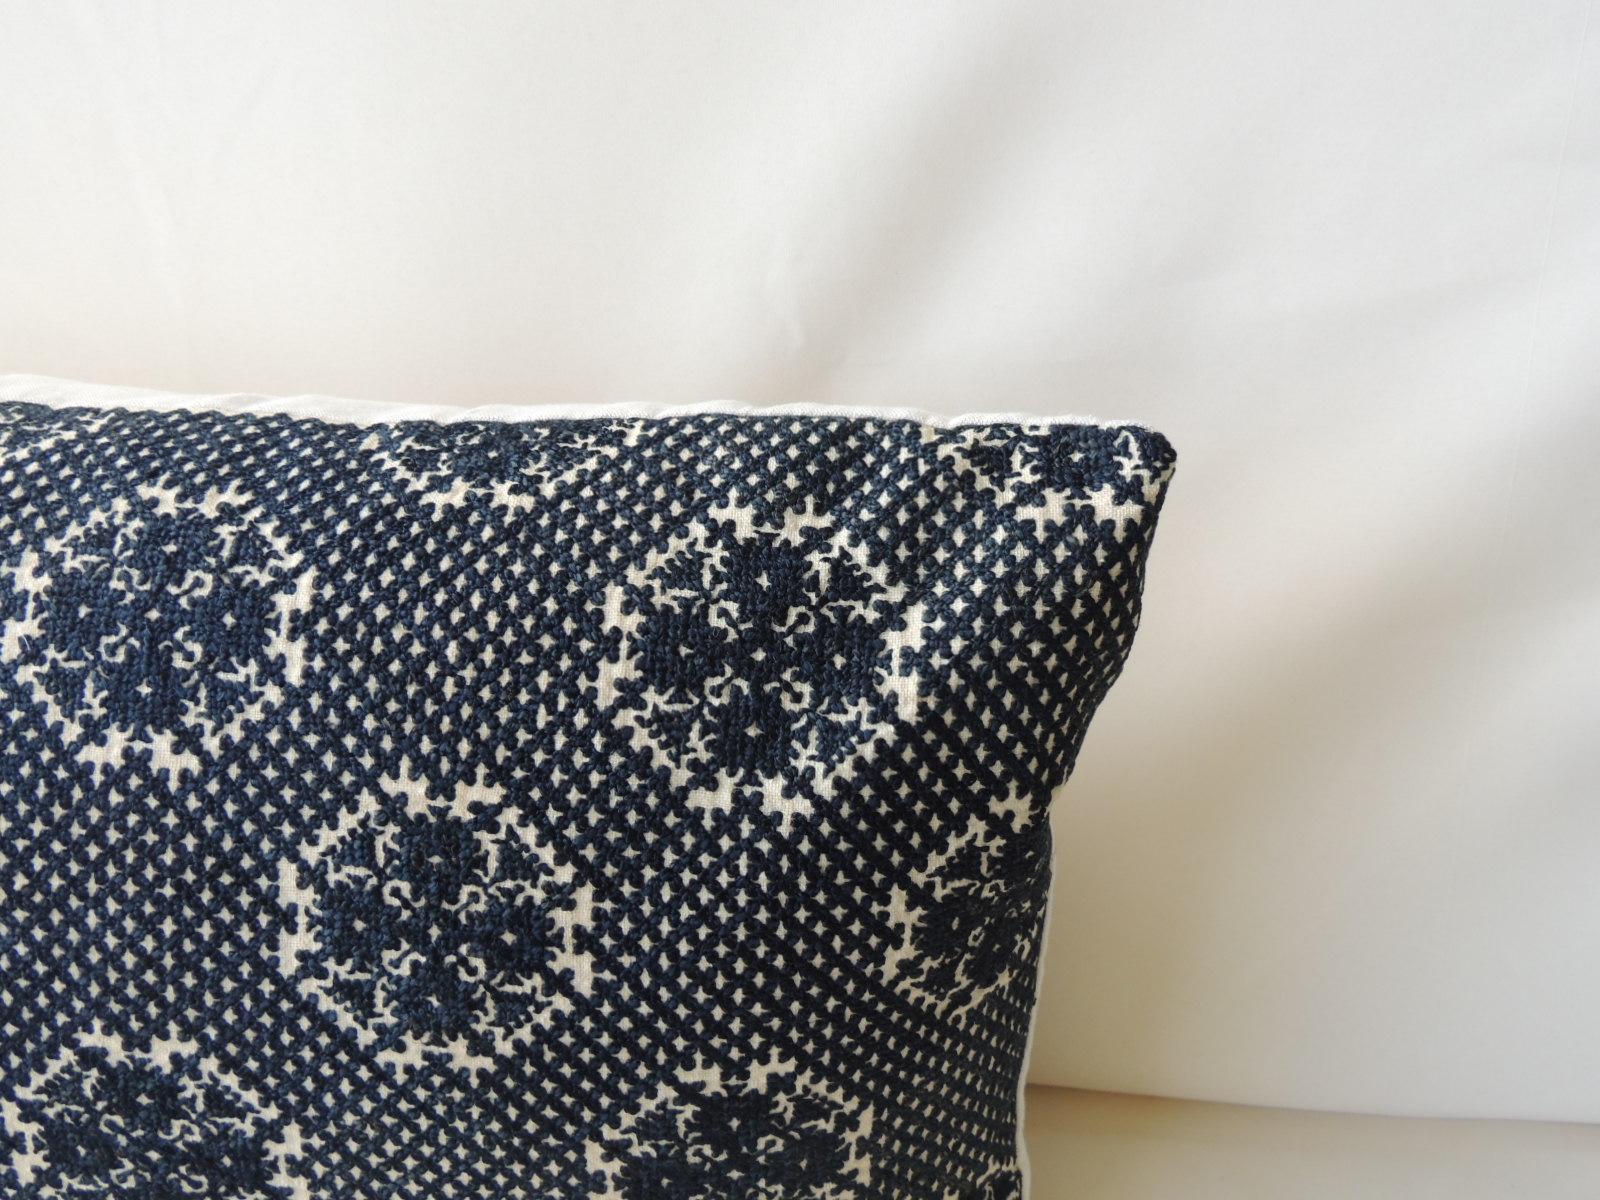 Embroidery fez antique textile bolster pillow.
Dark indigo embroidery large fez bolster pillow with natural linen frame and backing. Pillow handmade and designed in the USA. Closure by stitch (no zipper) with custom made pillow insert.
Ideal for a